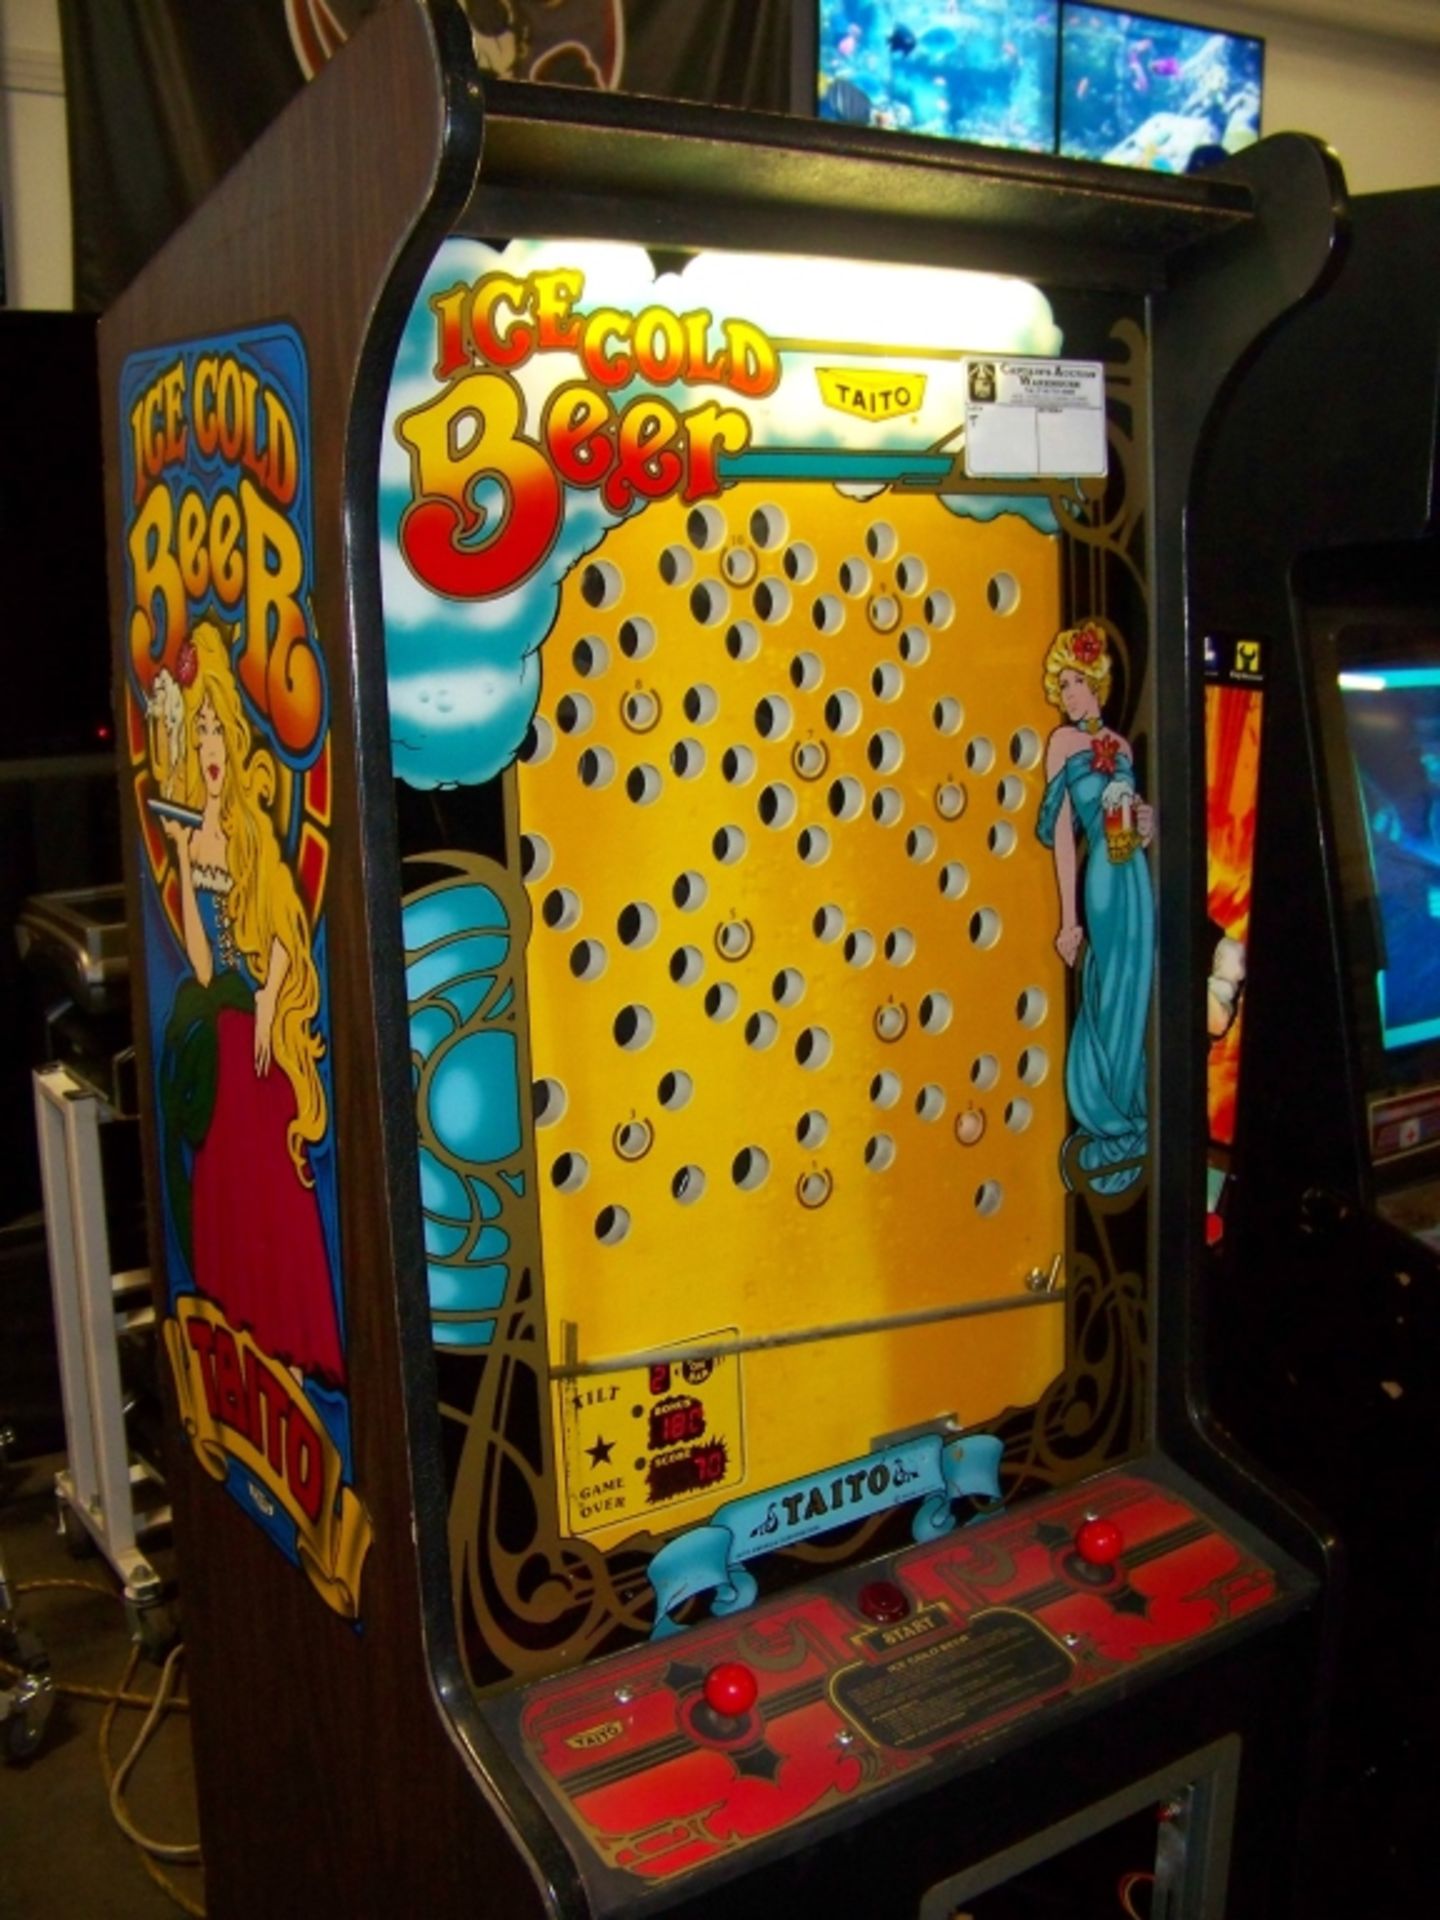 ICE COLD BEER ARCADE GAME TAITO CLASSIC - Image 4 of 7